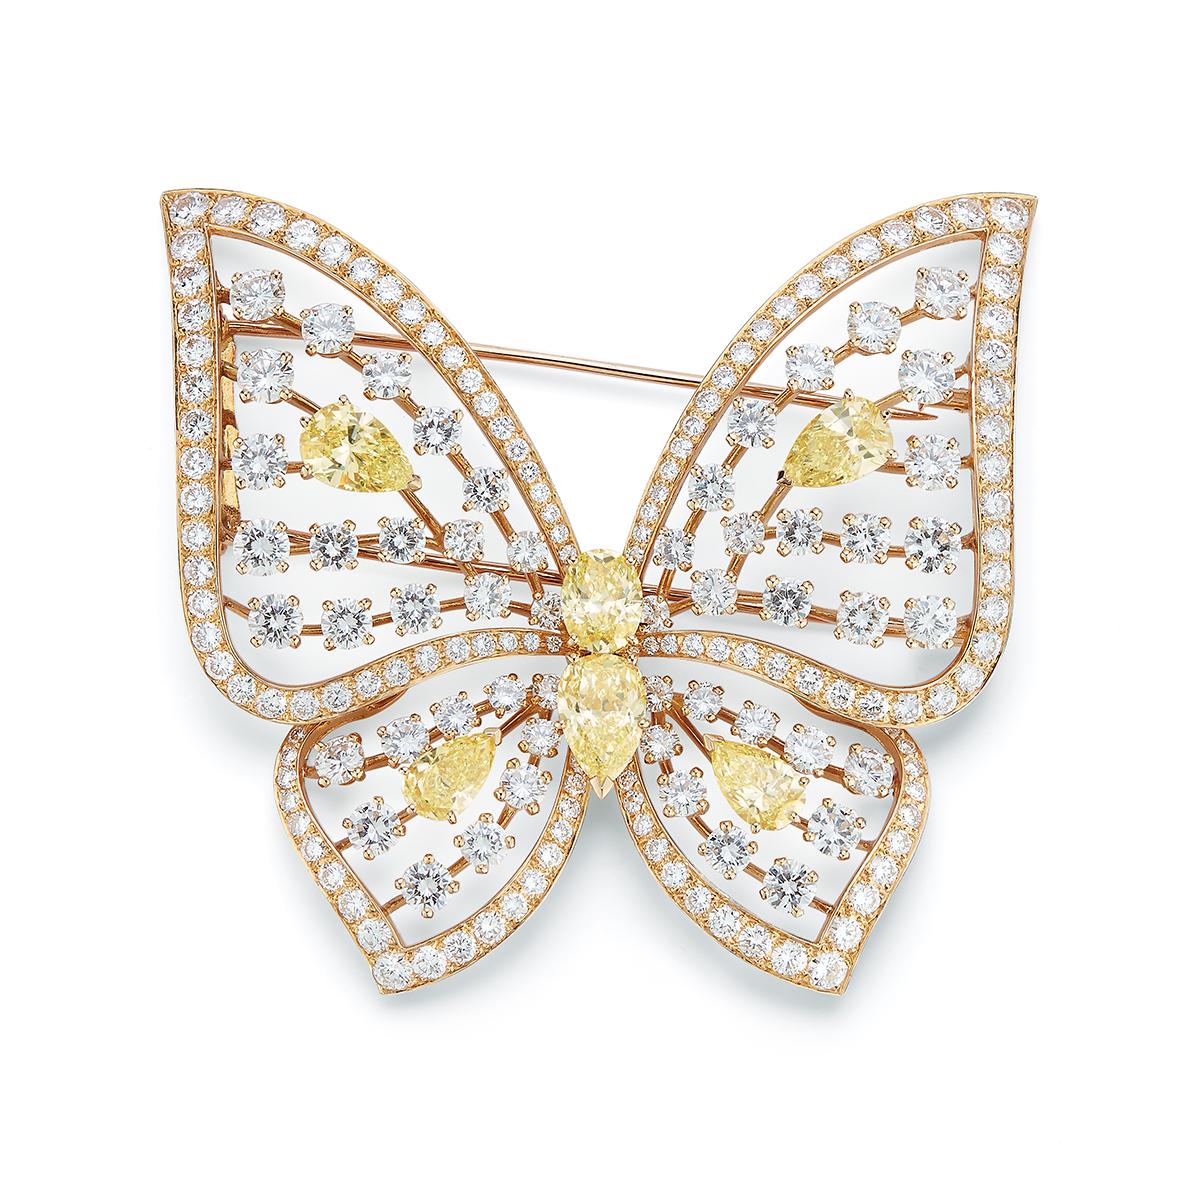 Magnificent Large Size Yellow and White Diamond Butterfly Brooch by Van Cleef and Arpels
Measurements: 1.5